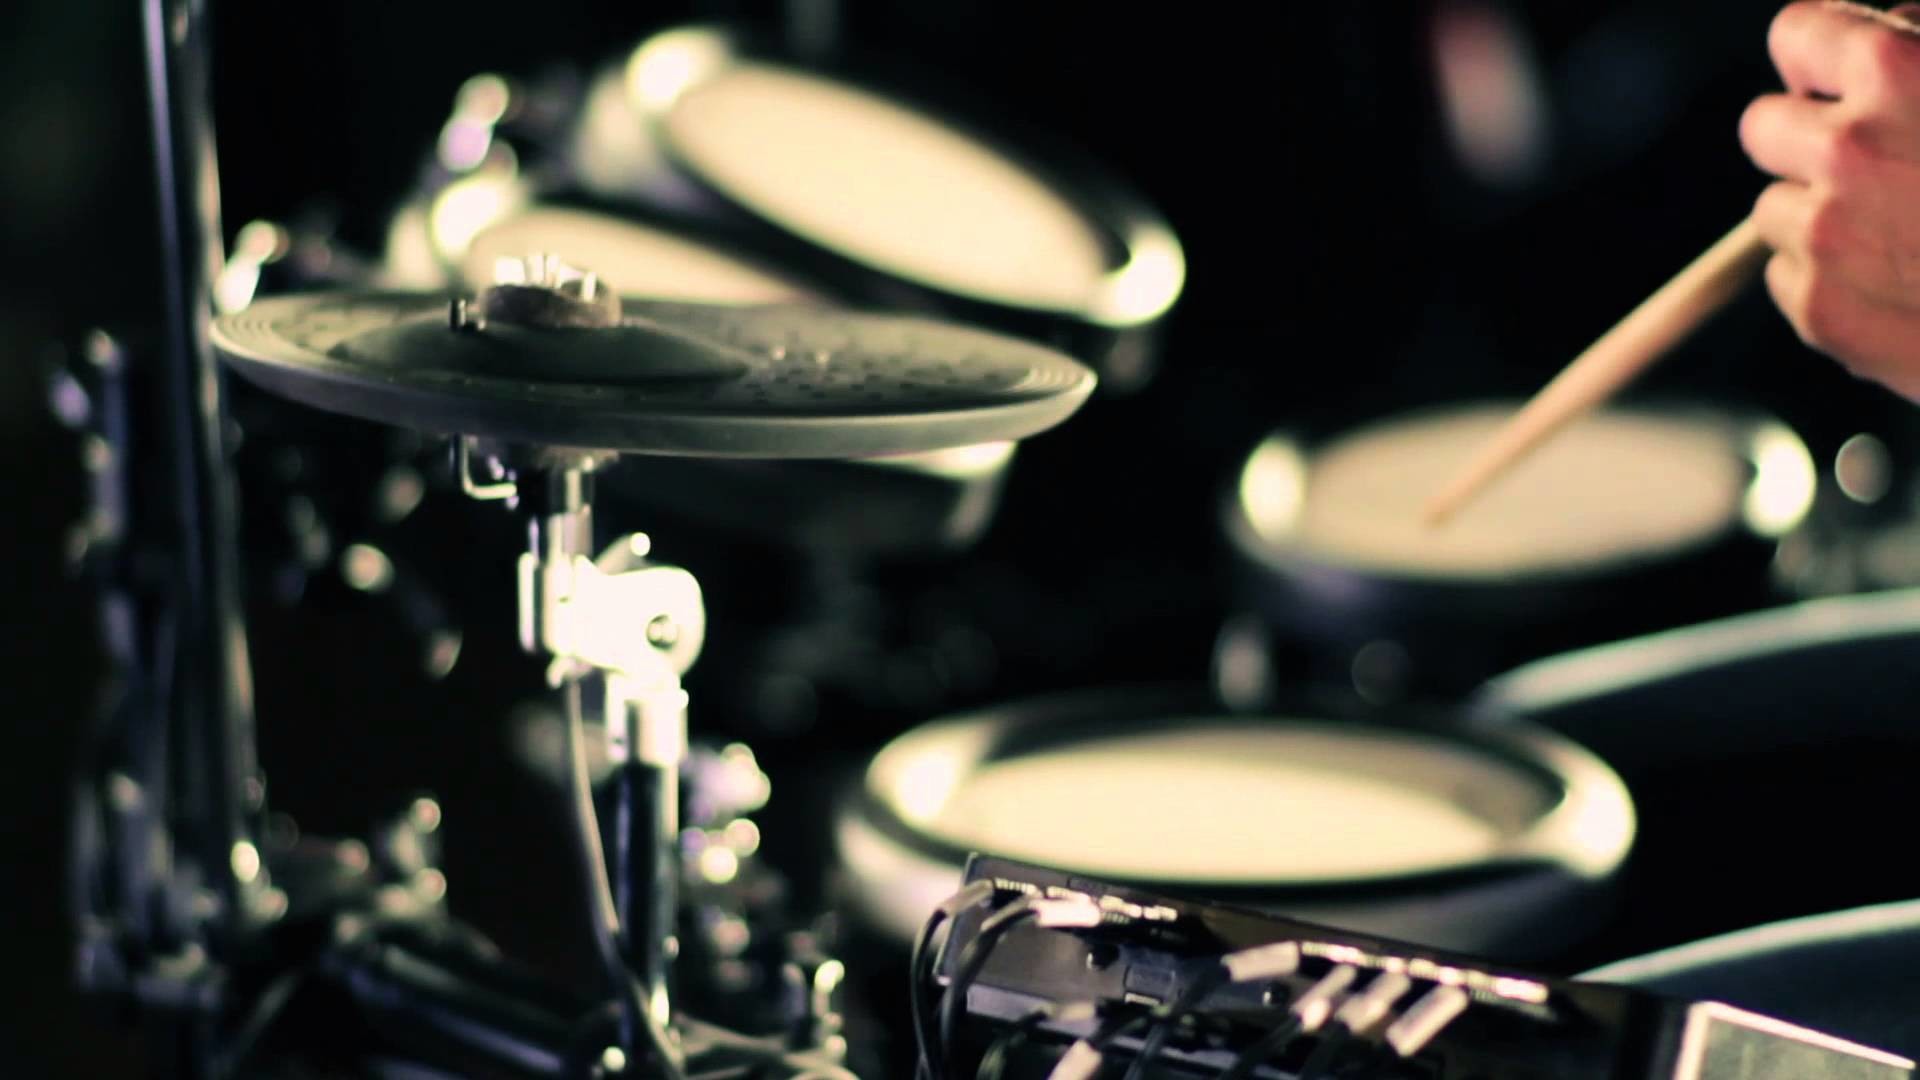 1920x1080 ... 13 Drums HD Wallpapers | Backgrounds - Wallpaper Abyss ...